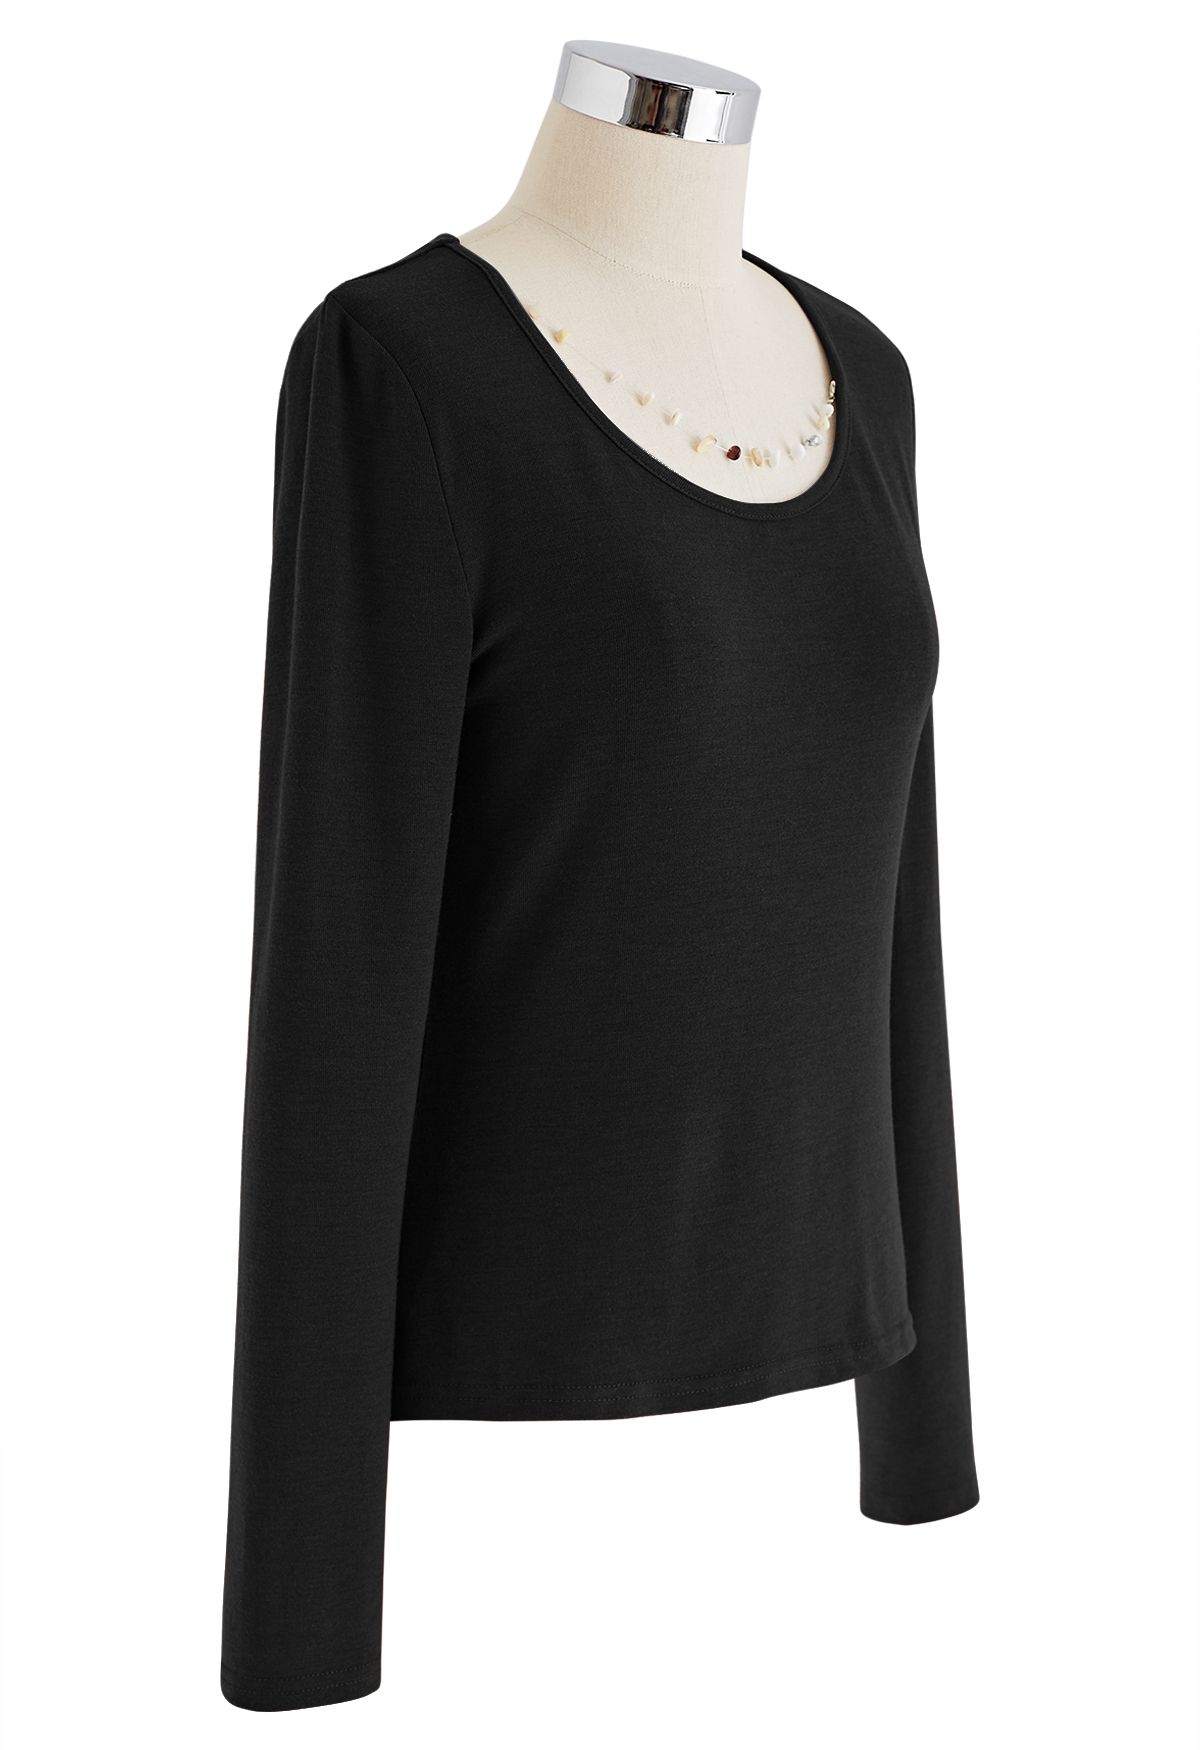 Pebble Necklace Long Sleeve Top in Black